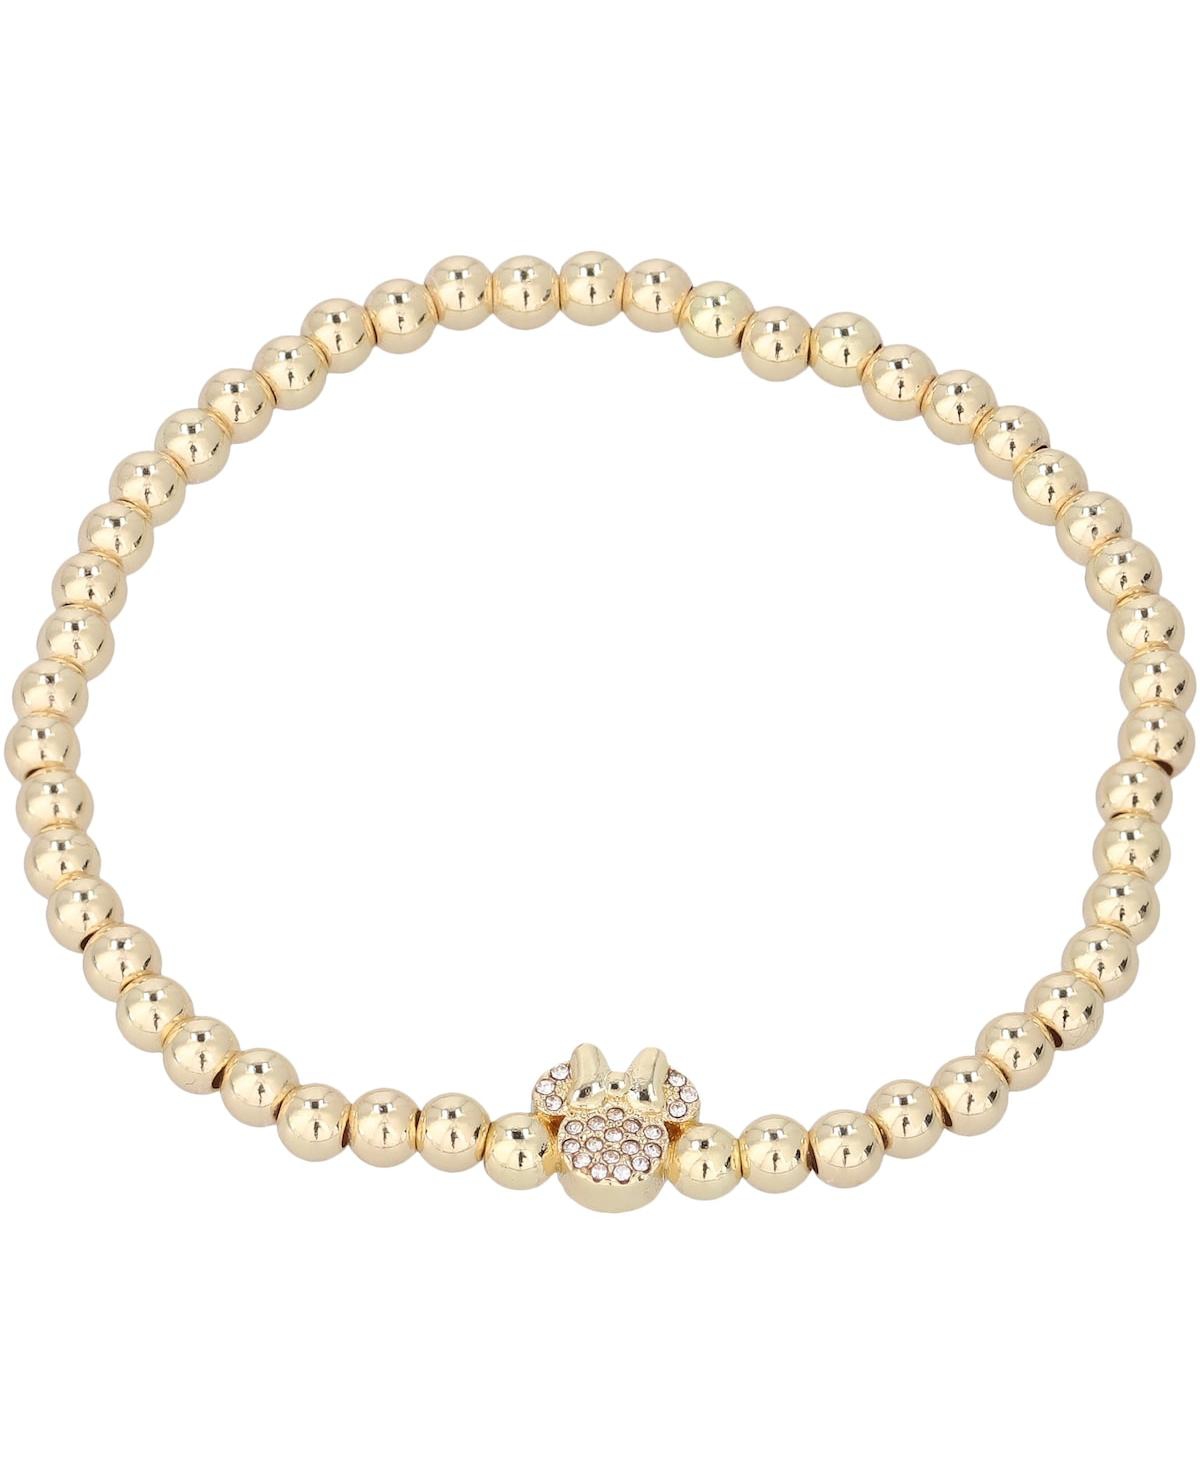 Women's Baublebar Mickey and Friends Minnie Mouse Pave Pisa Bracelet - Gold